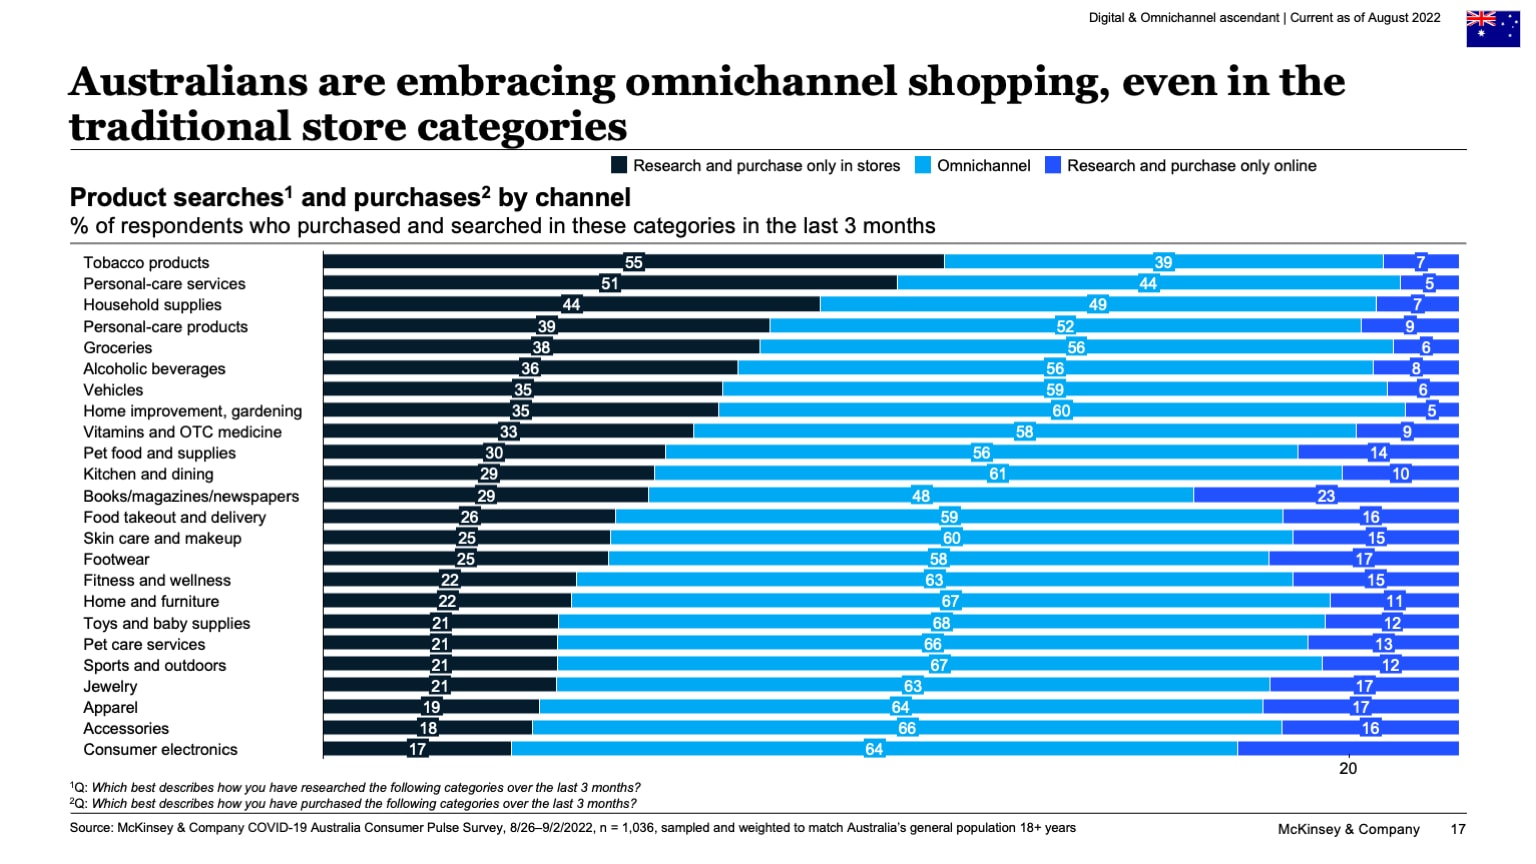 Australians are embracing omnichannel shopping, even in the traditional store categories